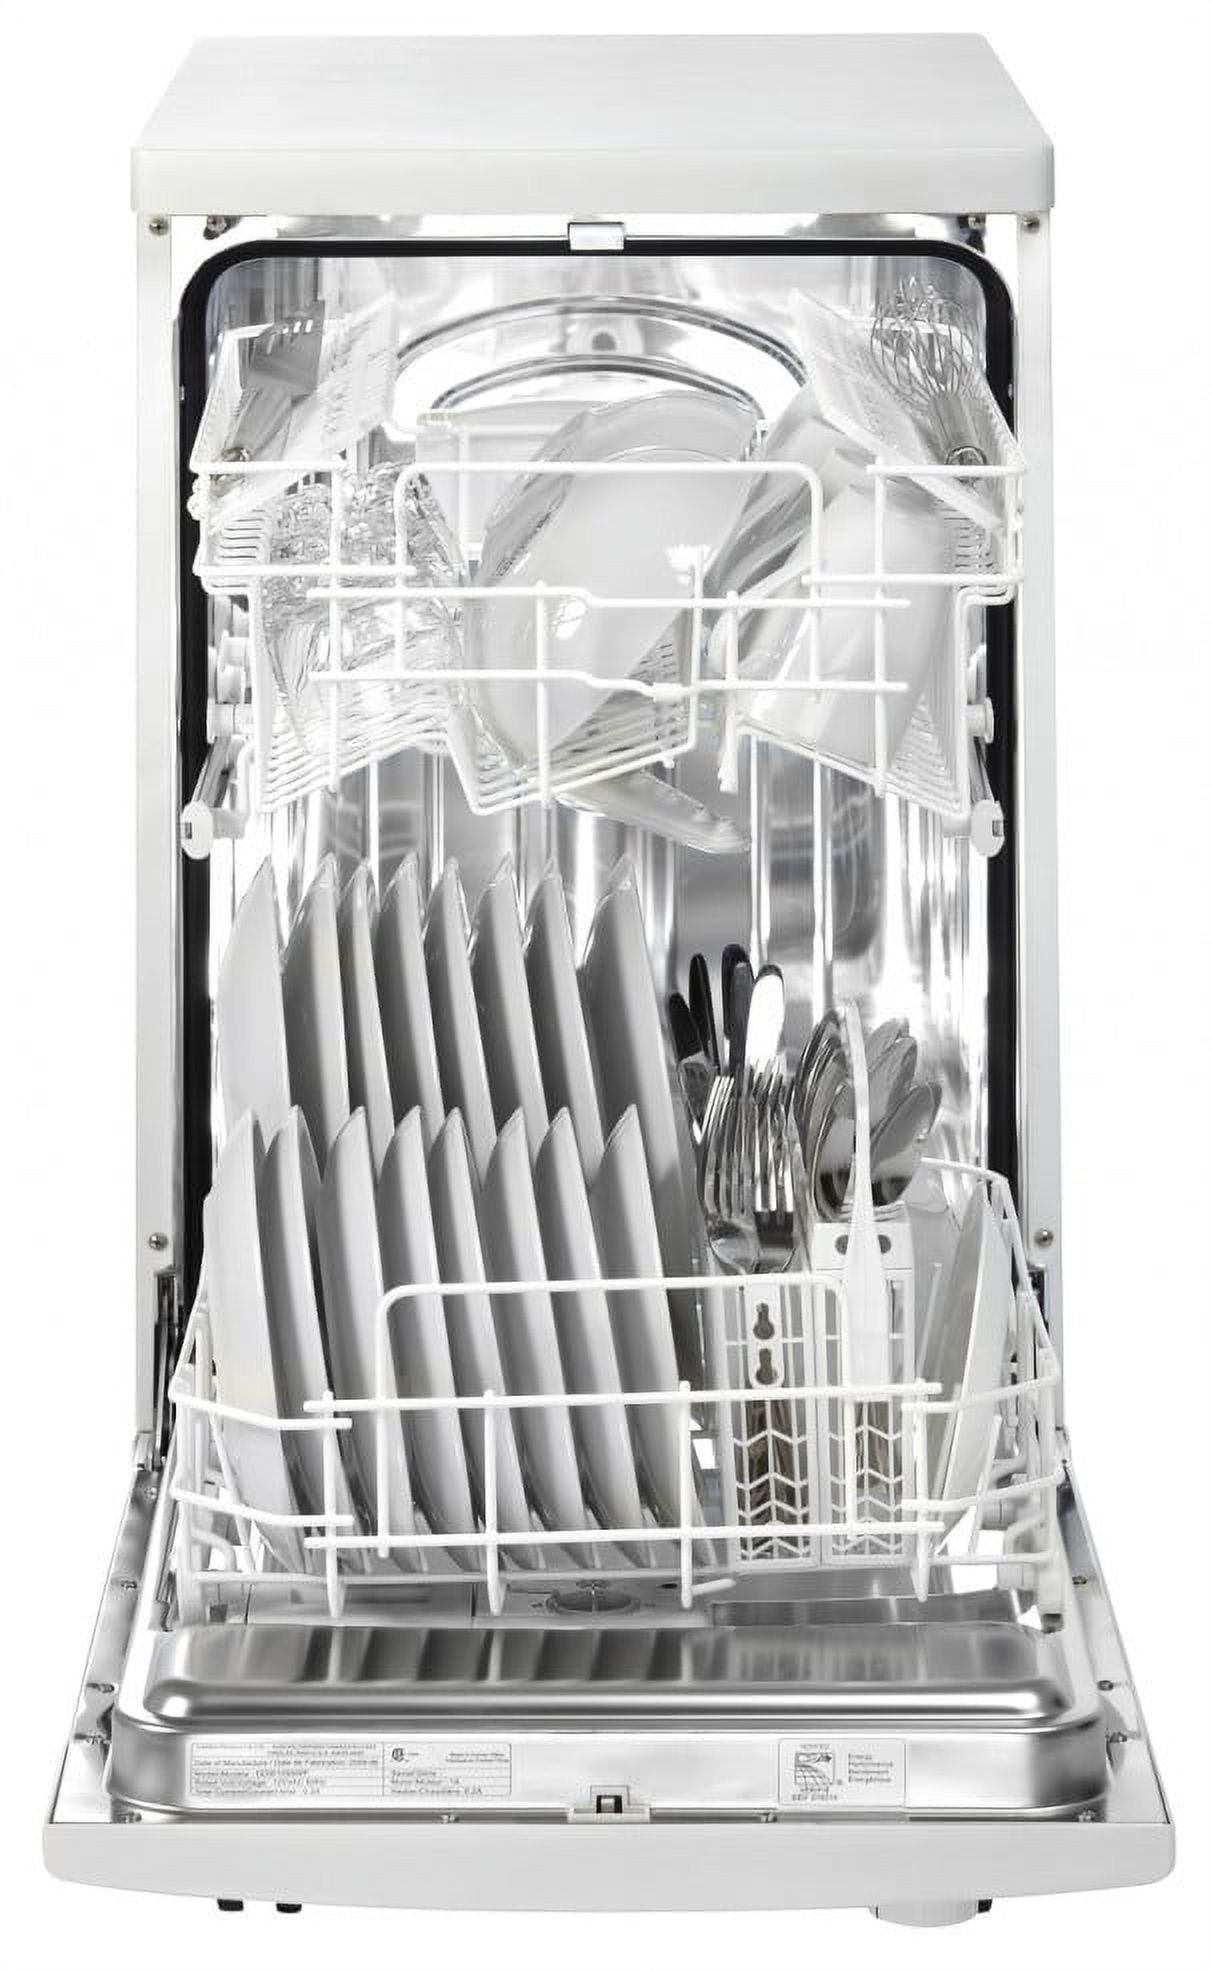 Danby 18" Portable Dishwasher in White - image 4 of 4